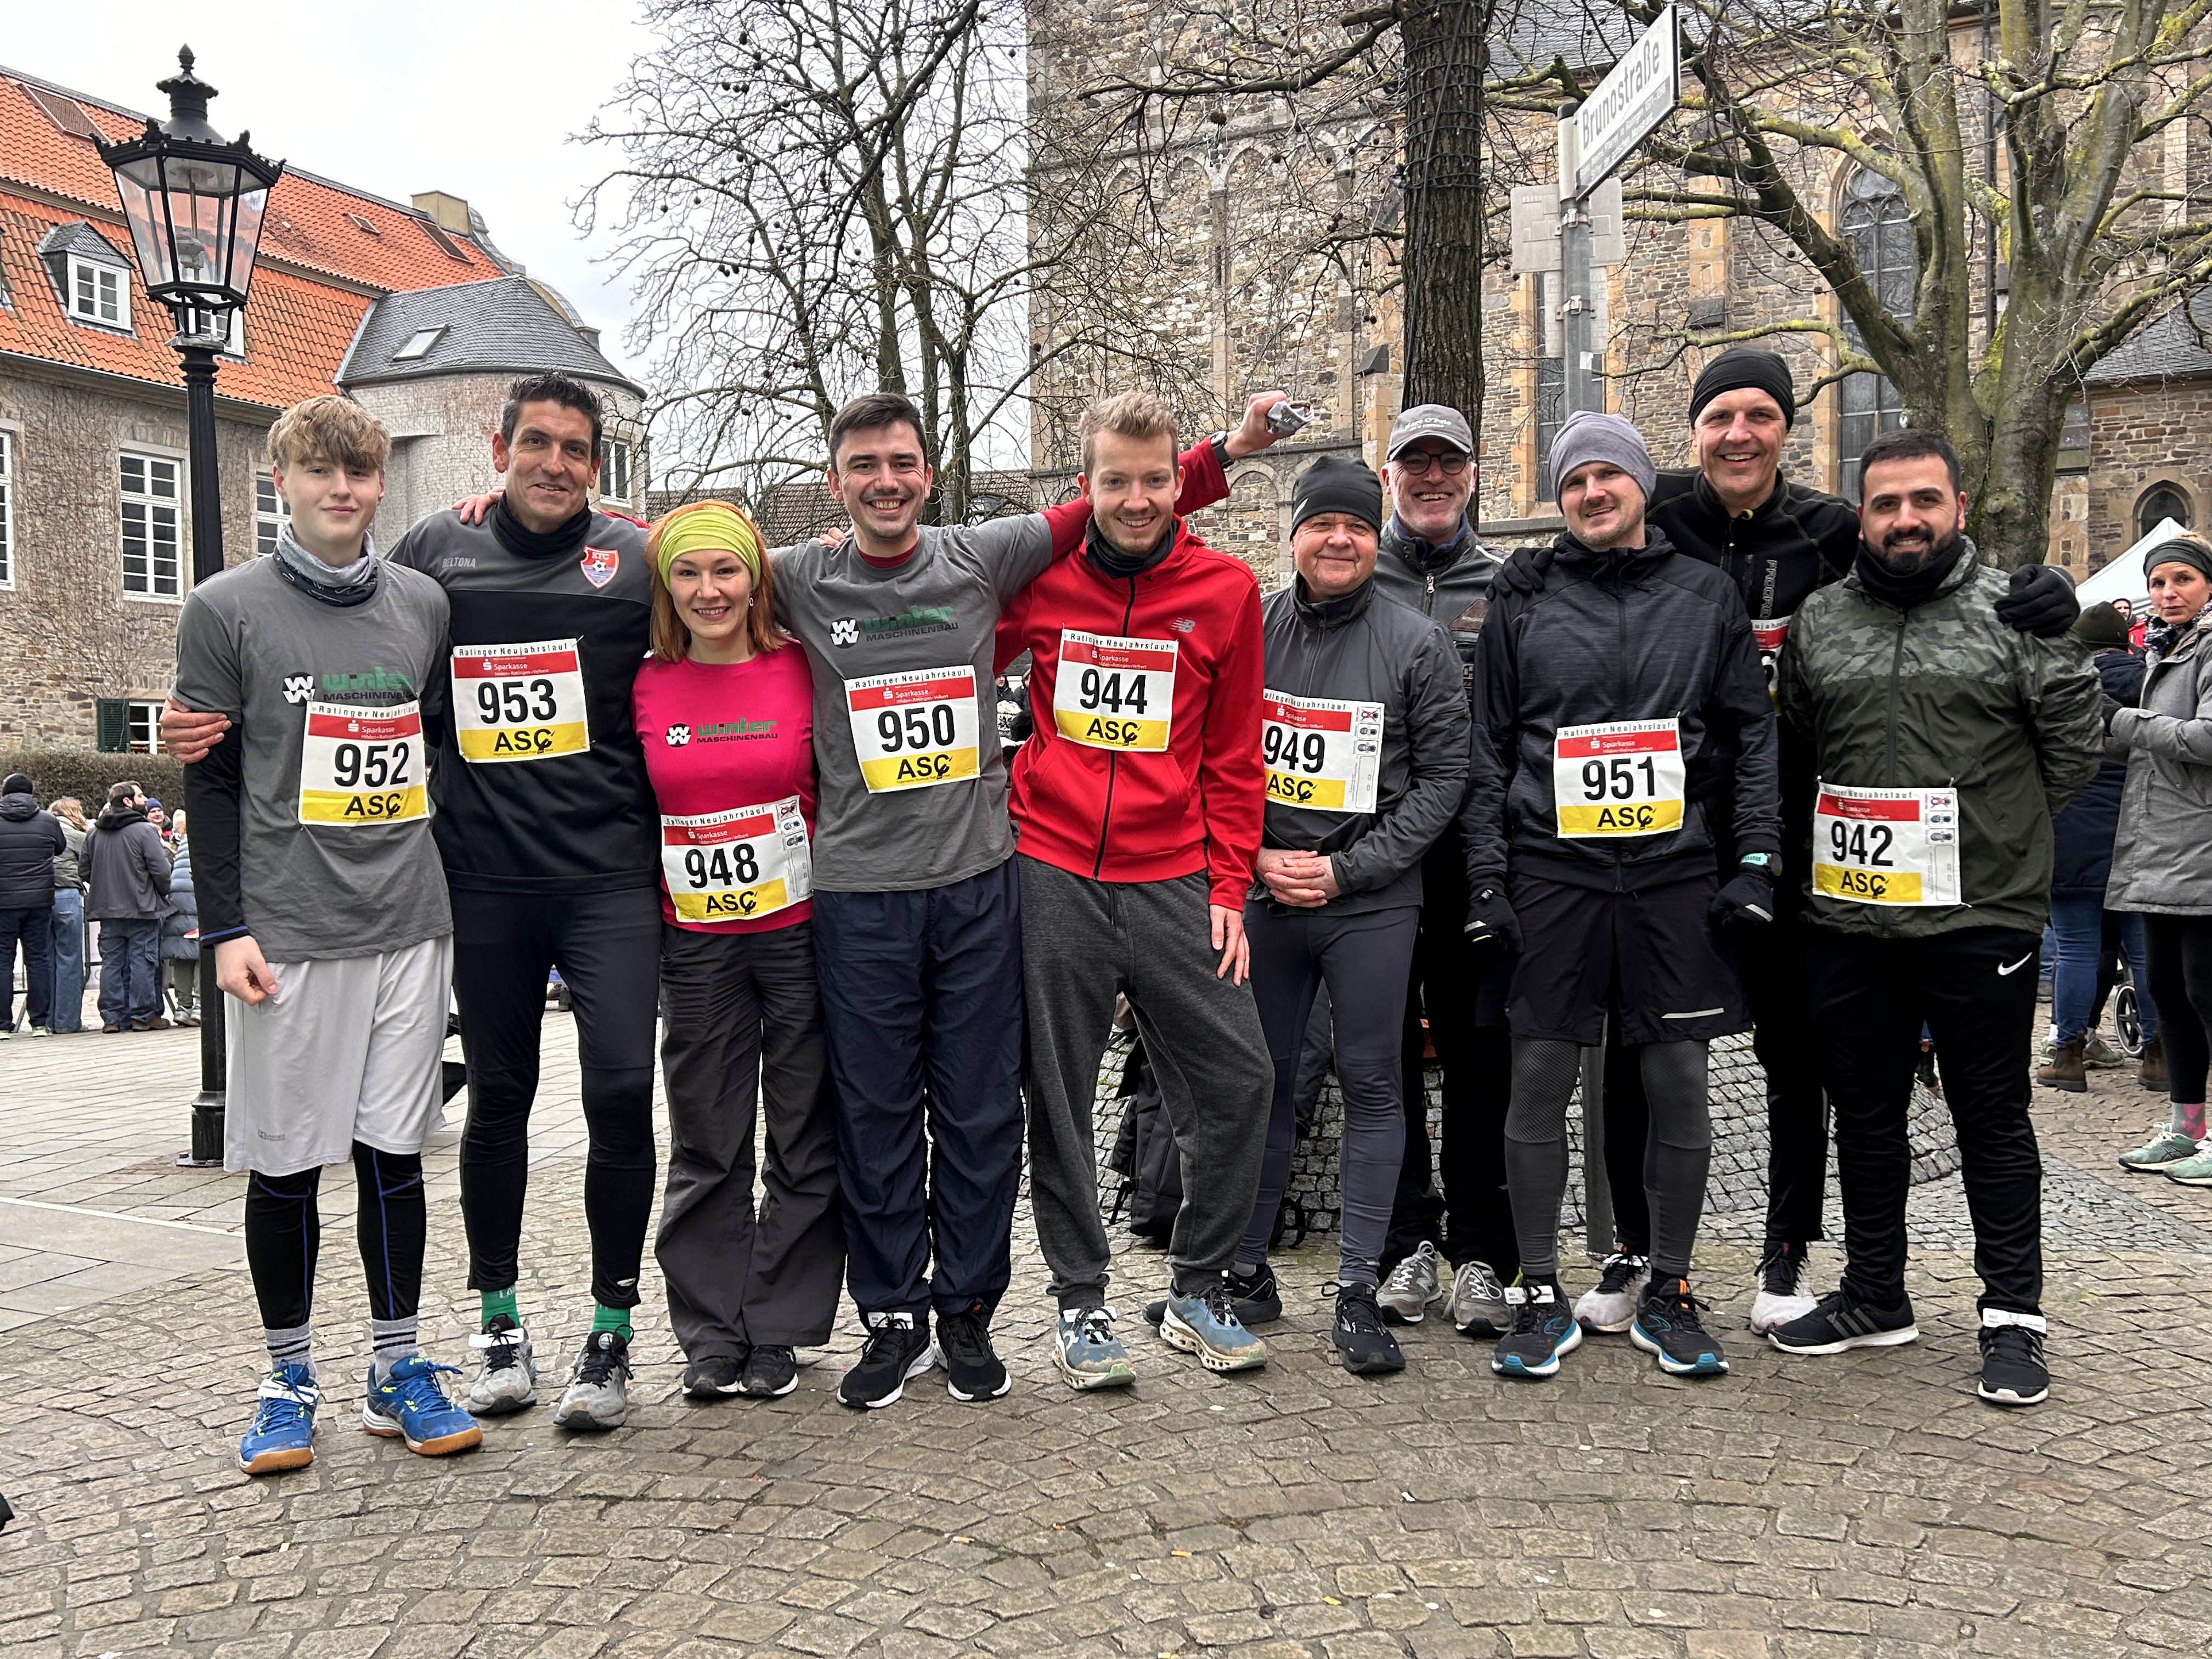 Team WINTER at the 44th Ratingen New Year's Run